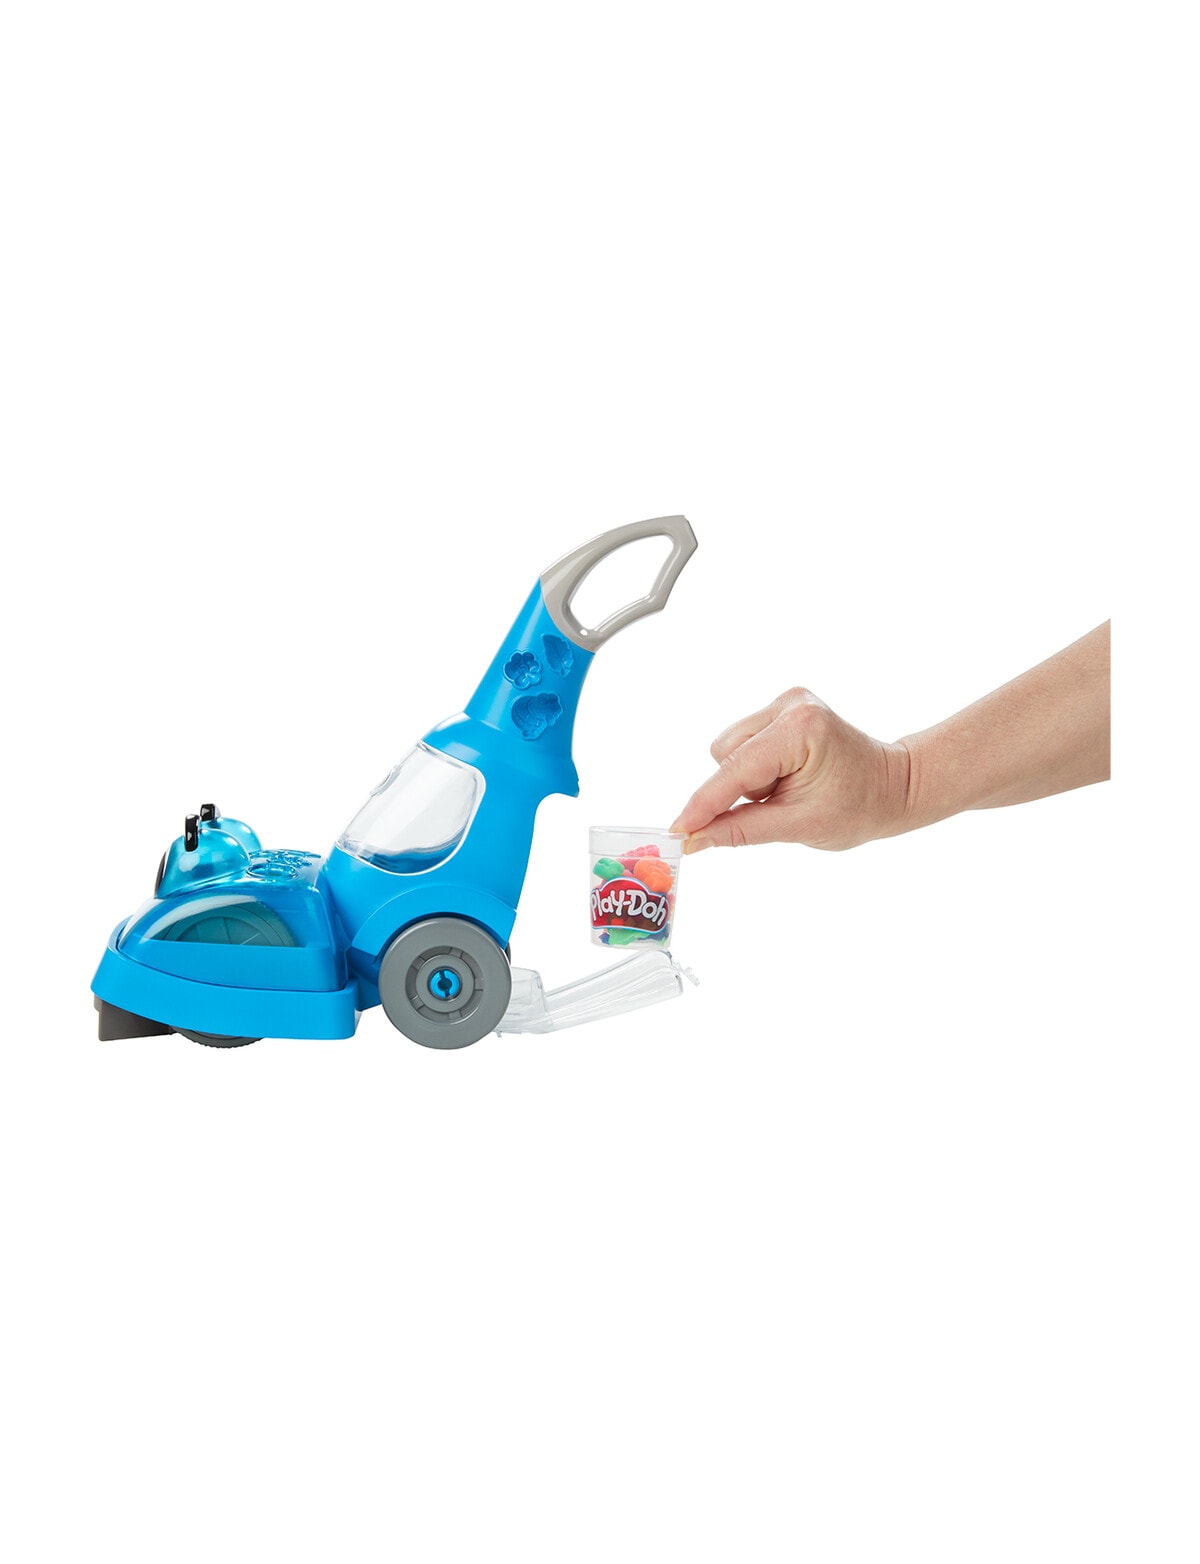 Playdoh Zoom Zoom Vacuum and Cleanup Set - Arts & Crafts